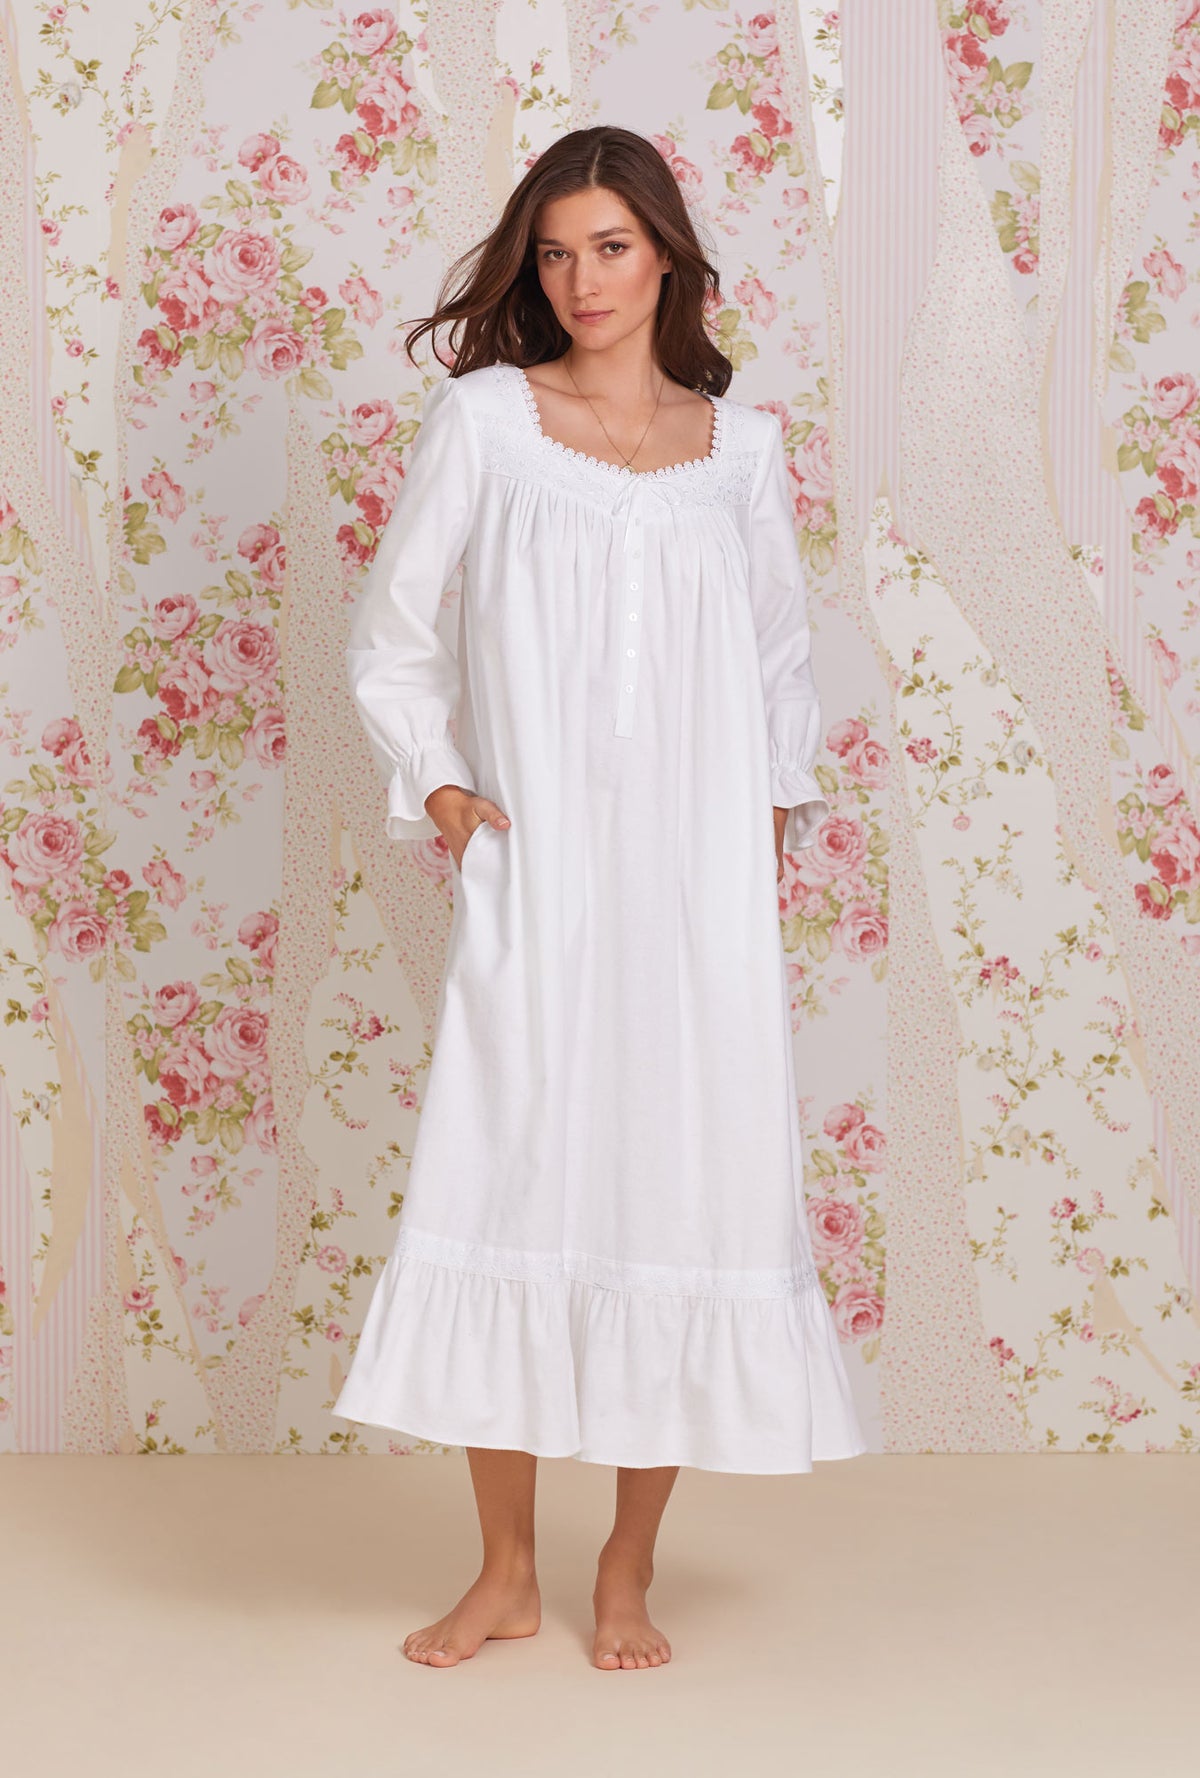 A lady wearing white Long Sleeve Cotton Flannel Embroidery Long Nightgown